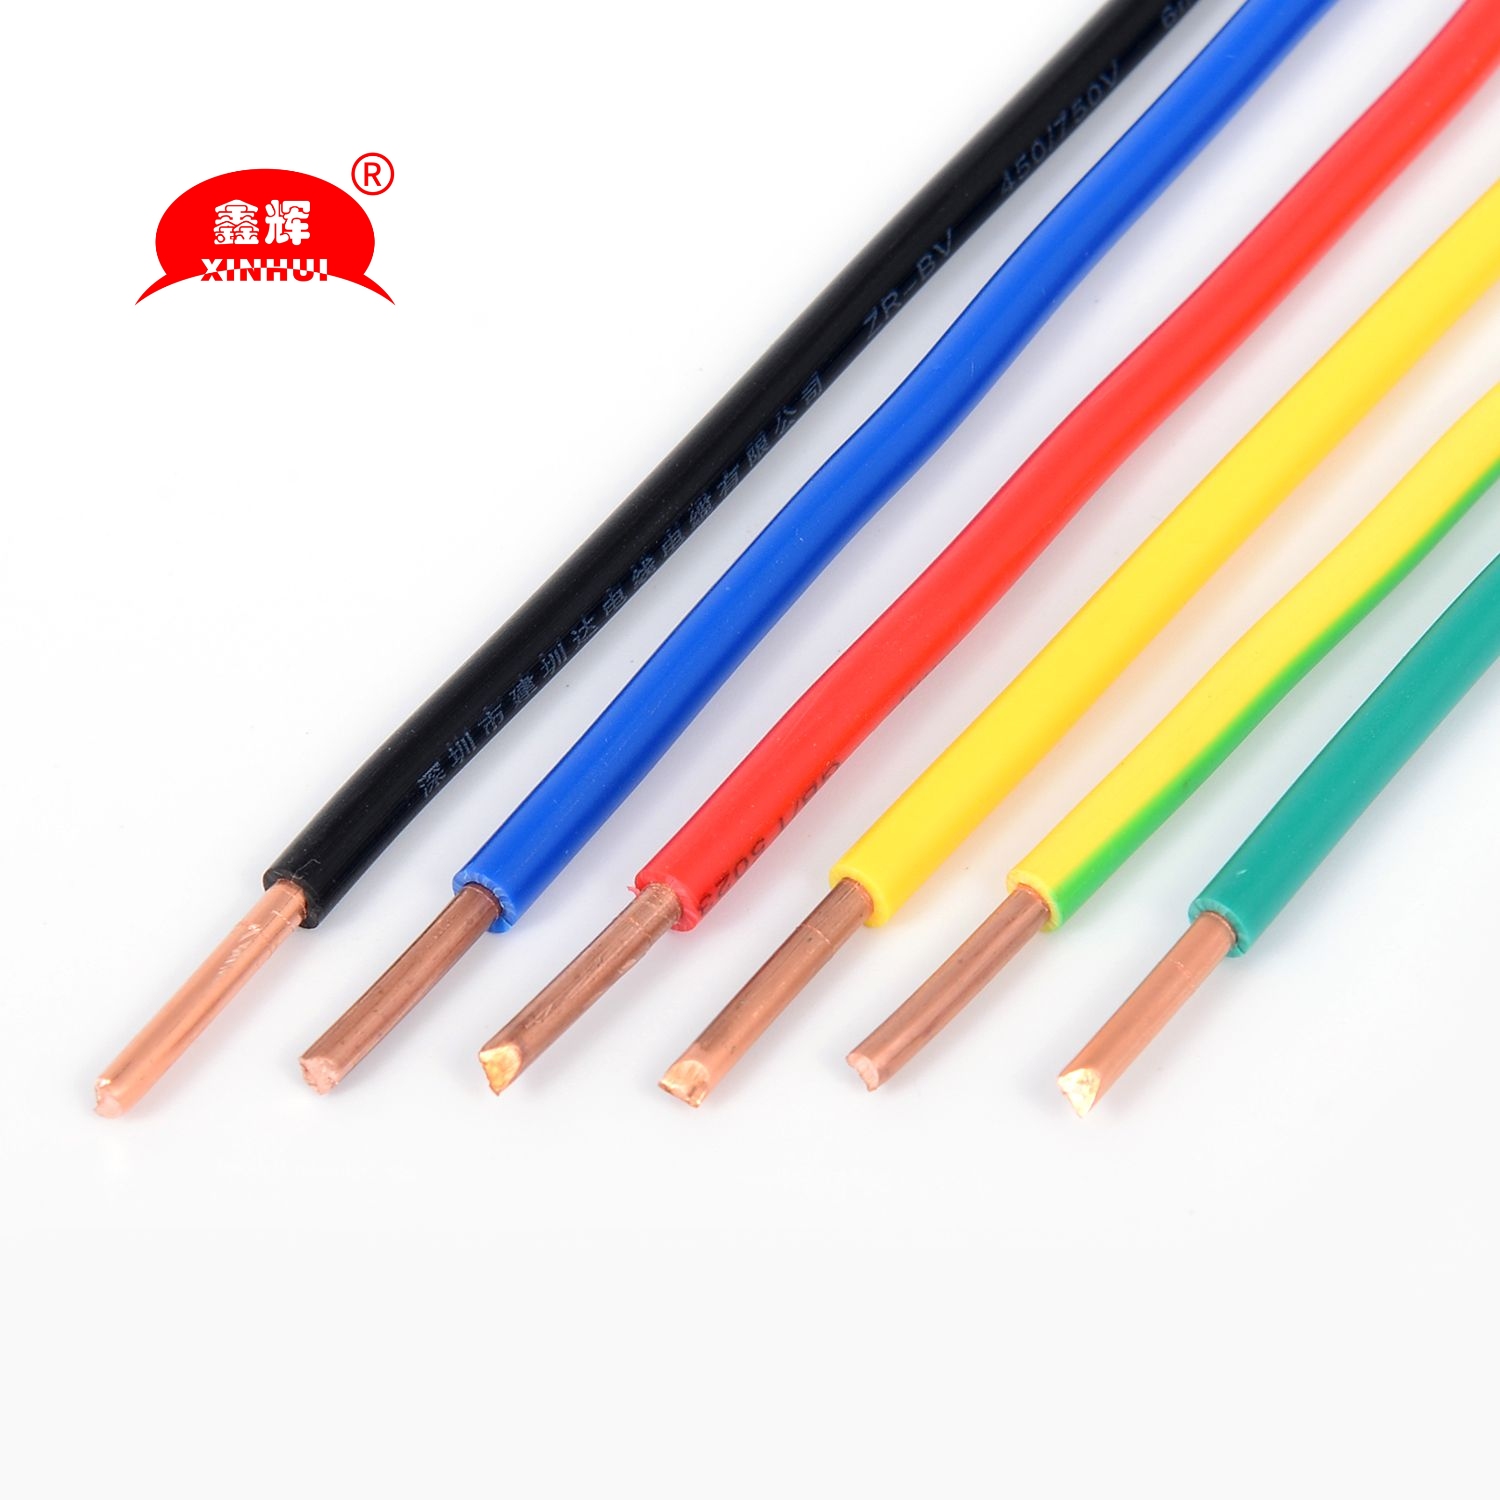 BV Single Copper core Pvc Insulated House wiring Building Electric Wire